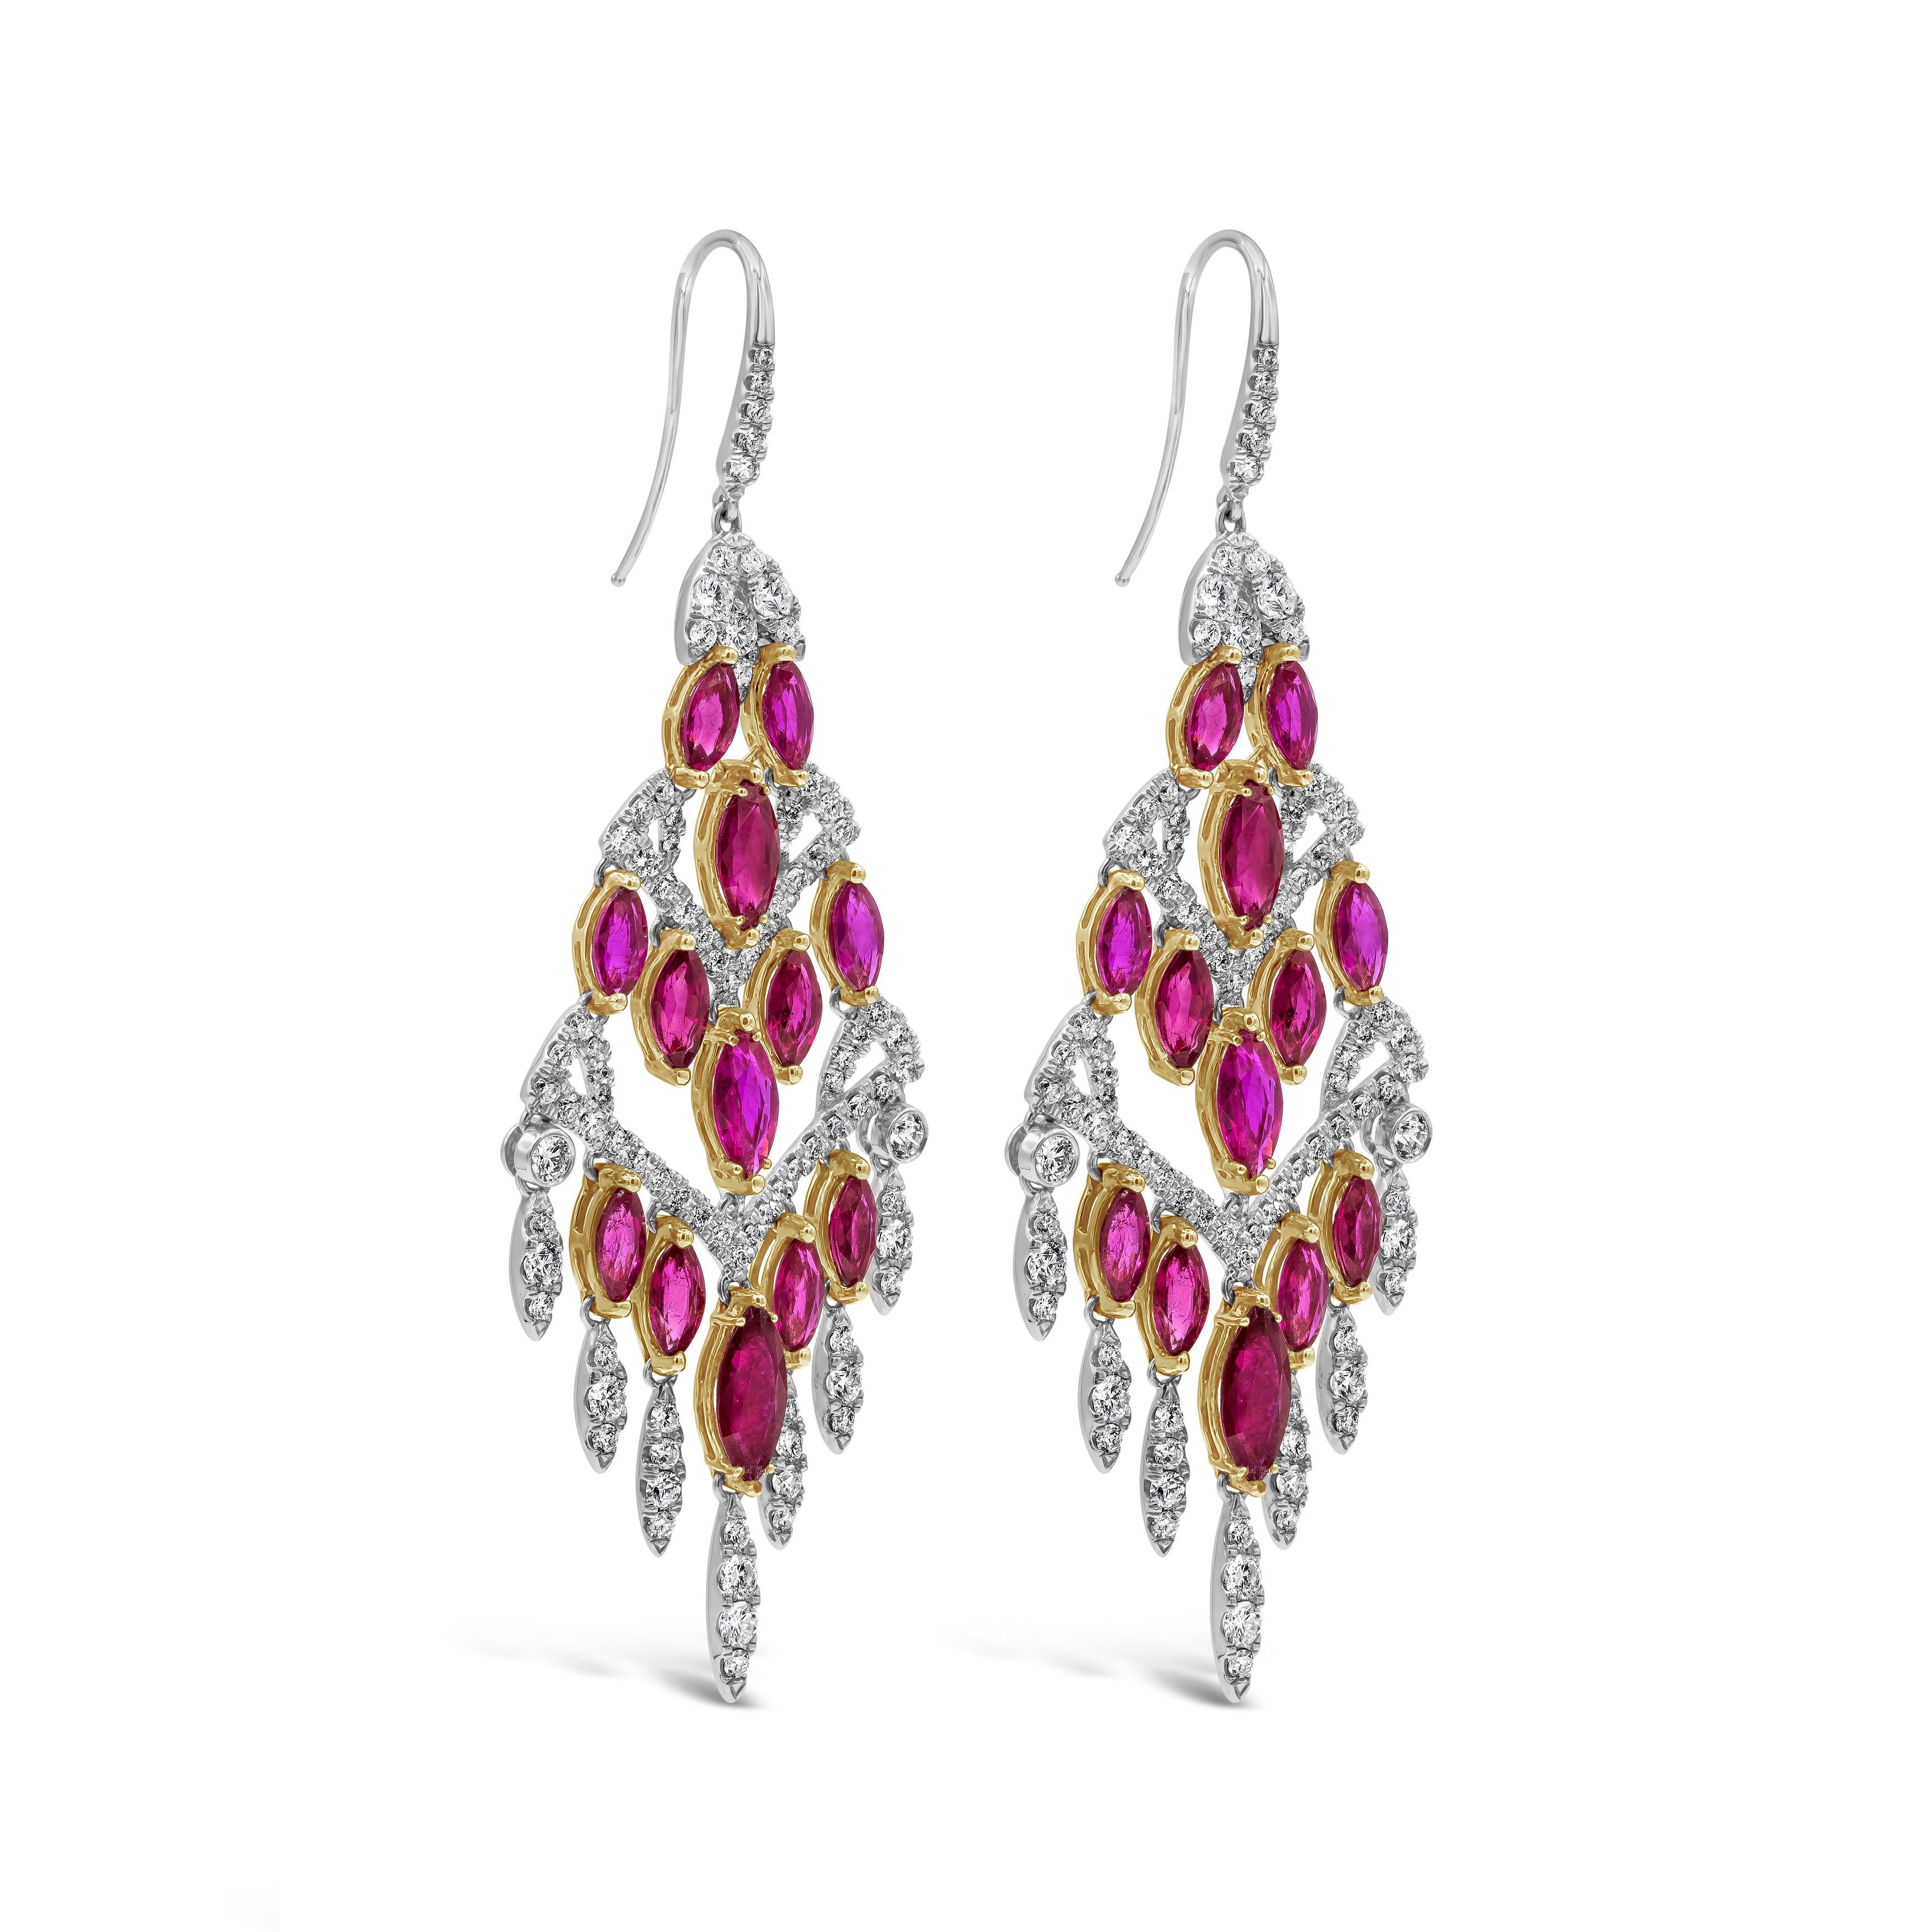 A delicate and exquisite pair of chandelier earrings showcasing 26 marquise cut red rubies weighing 16.29 carats total and 4.42 carats of brilliant round diamonds. Set in an elegant open work dangling chandelier design and Finely made in 18K White